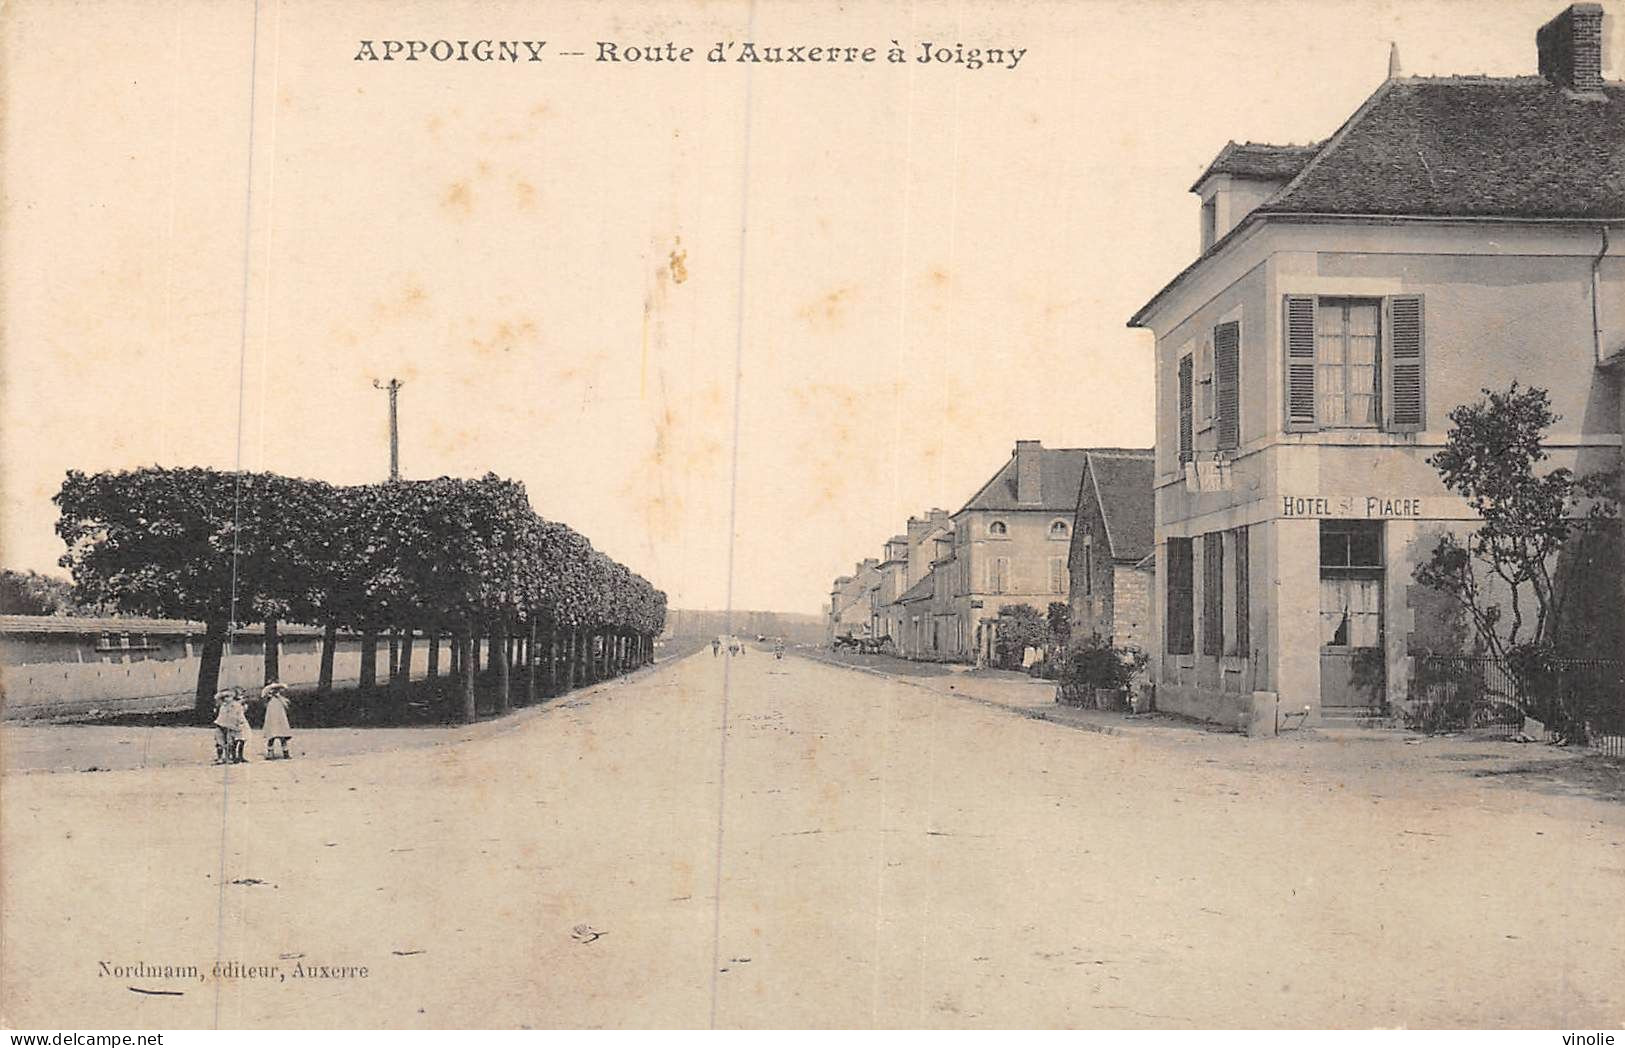 24-5140 : APPOIGNY. ROUTE D'AUXERRE A JOIGNY - Appoigny